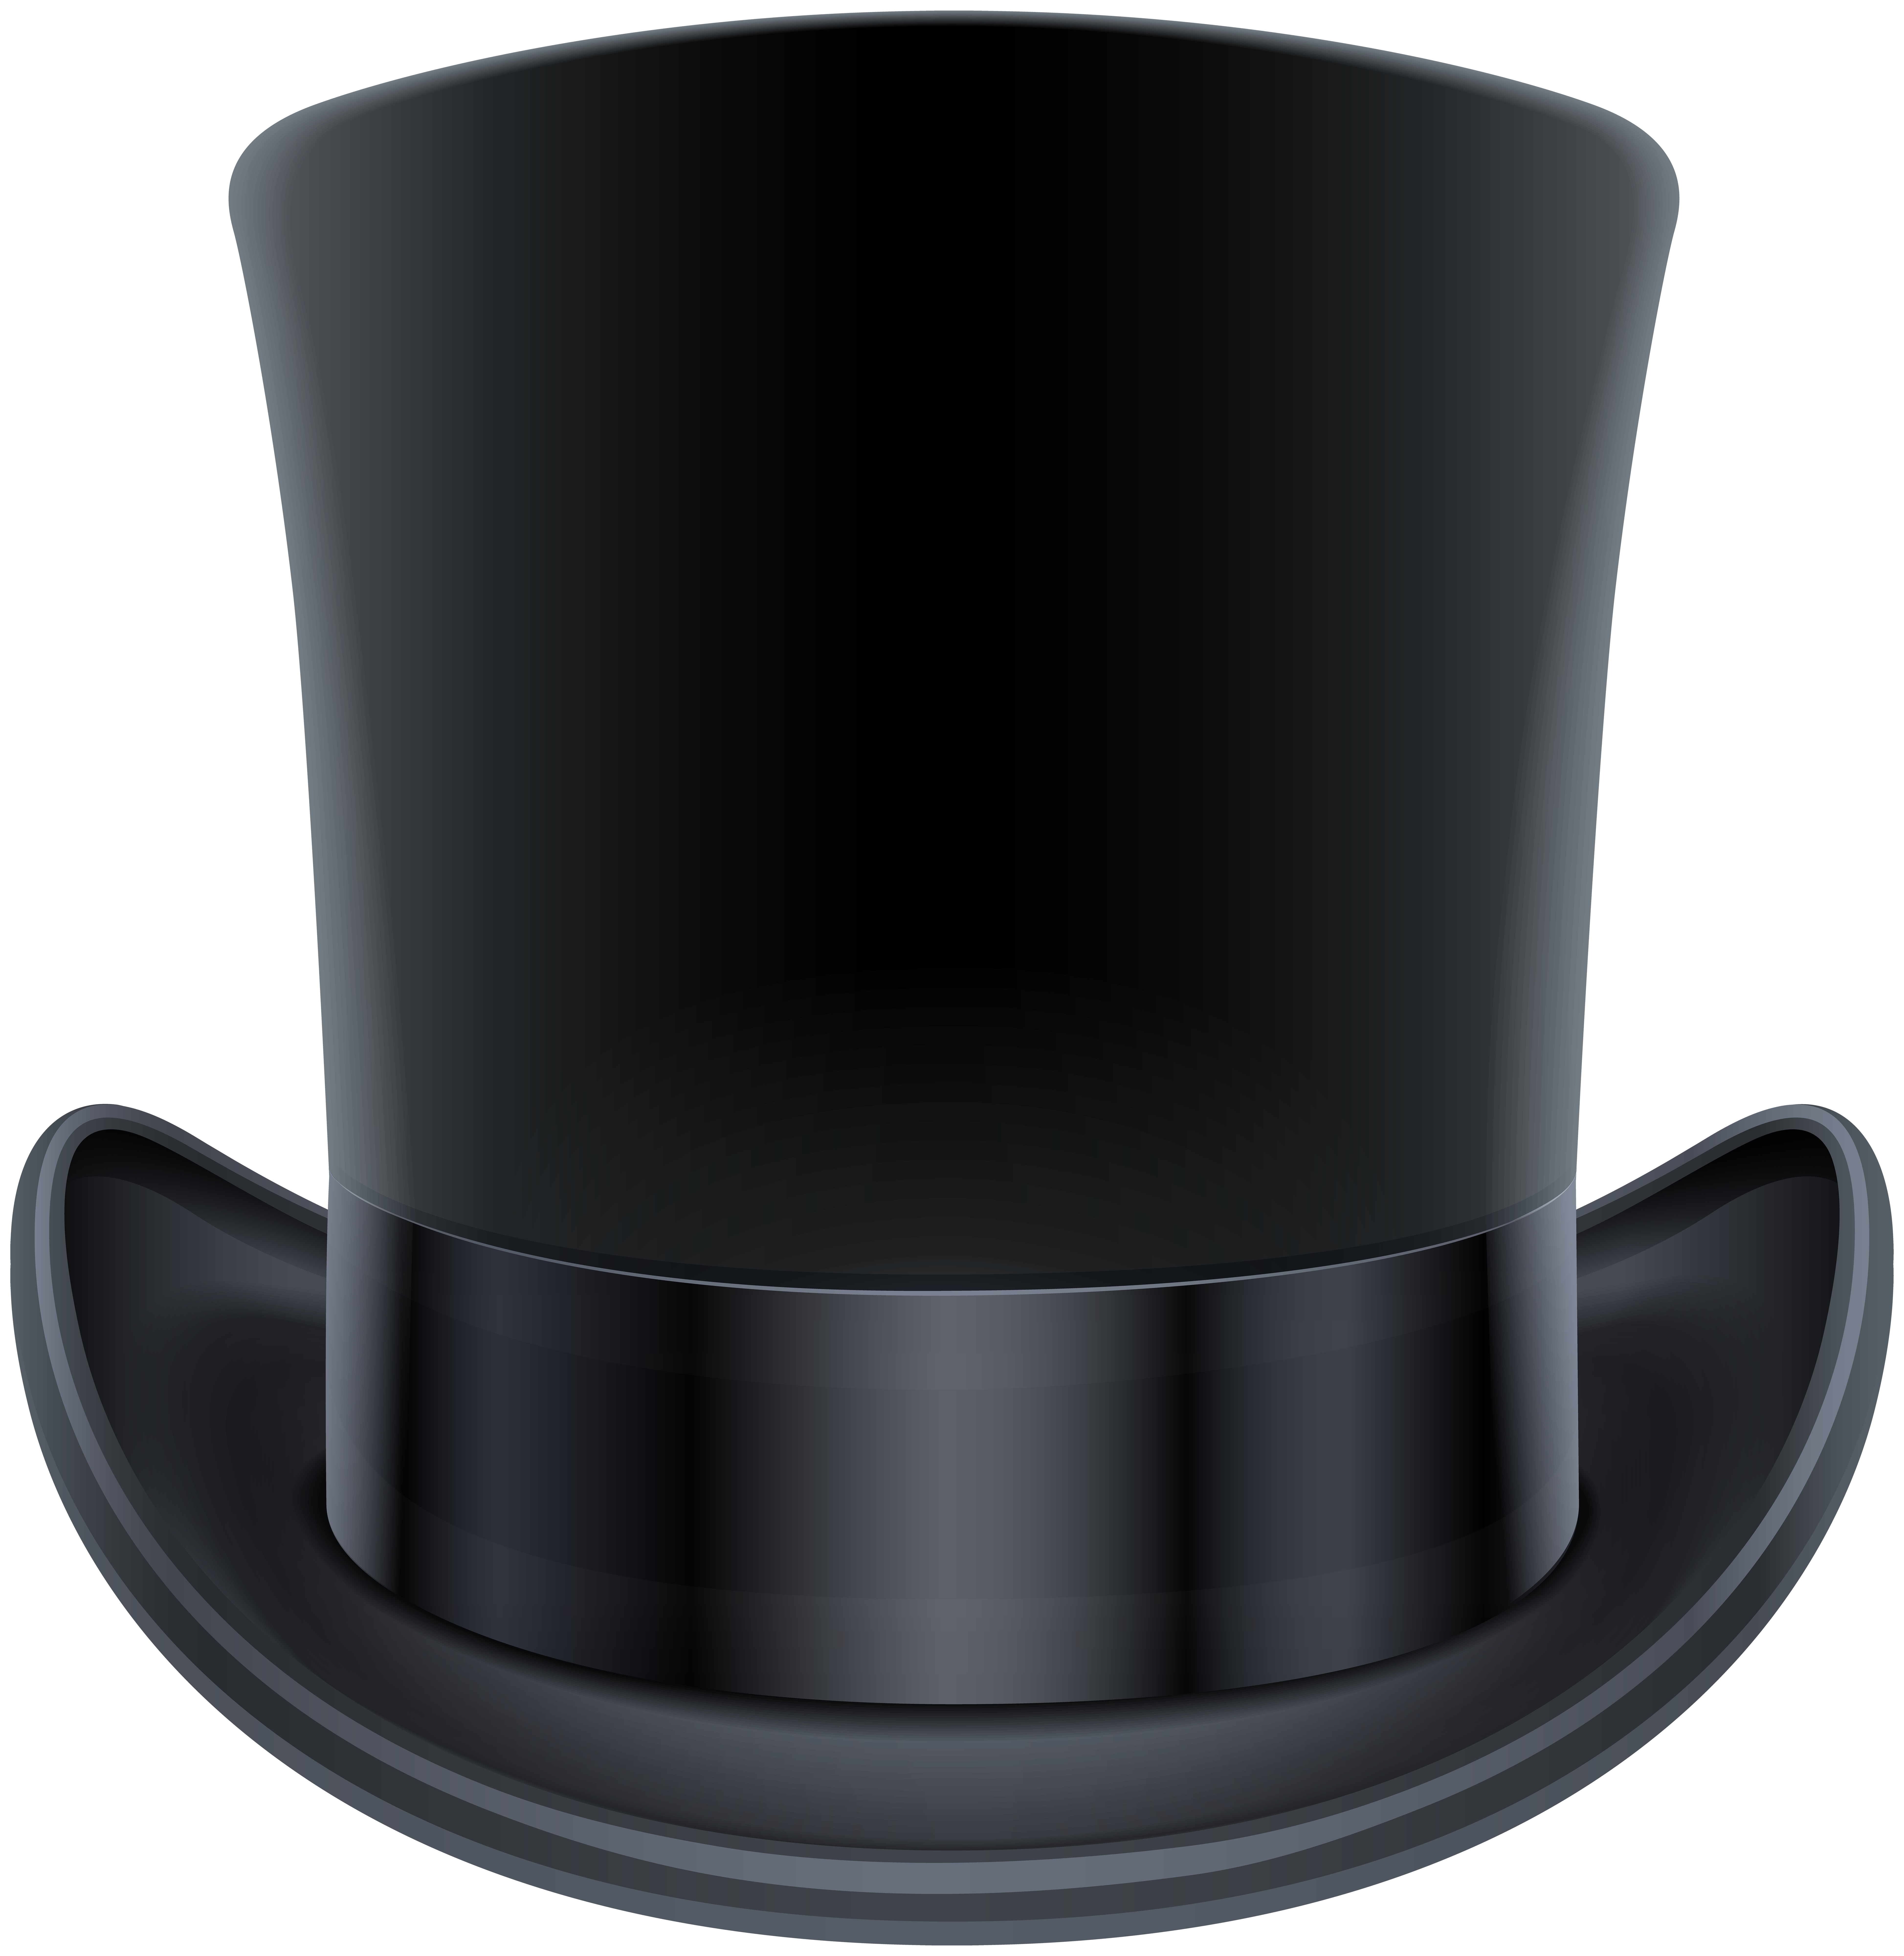 Top Hat Black Png Clip Art Image Gallery Yopriceville High Quality Images And Transparent Png Free Clipart